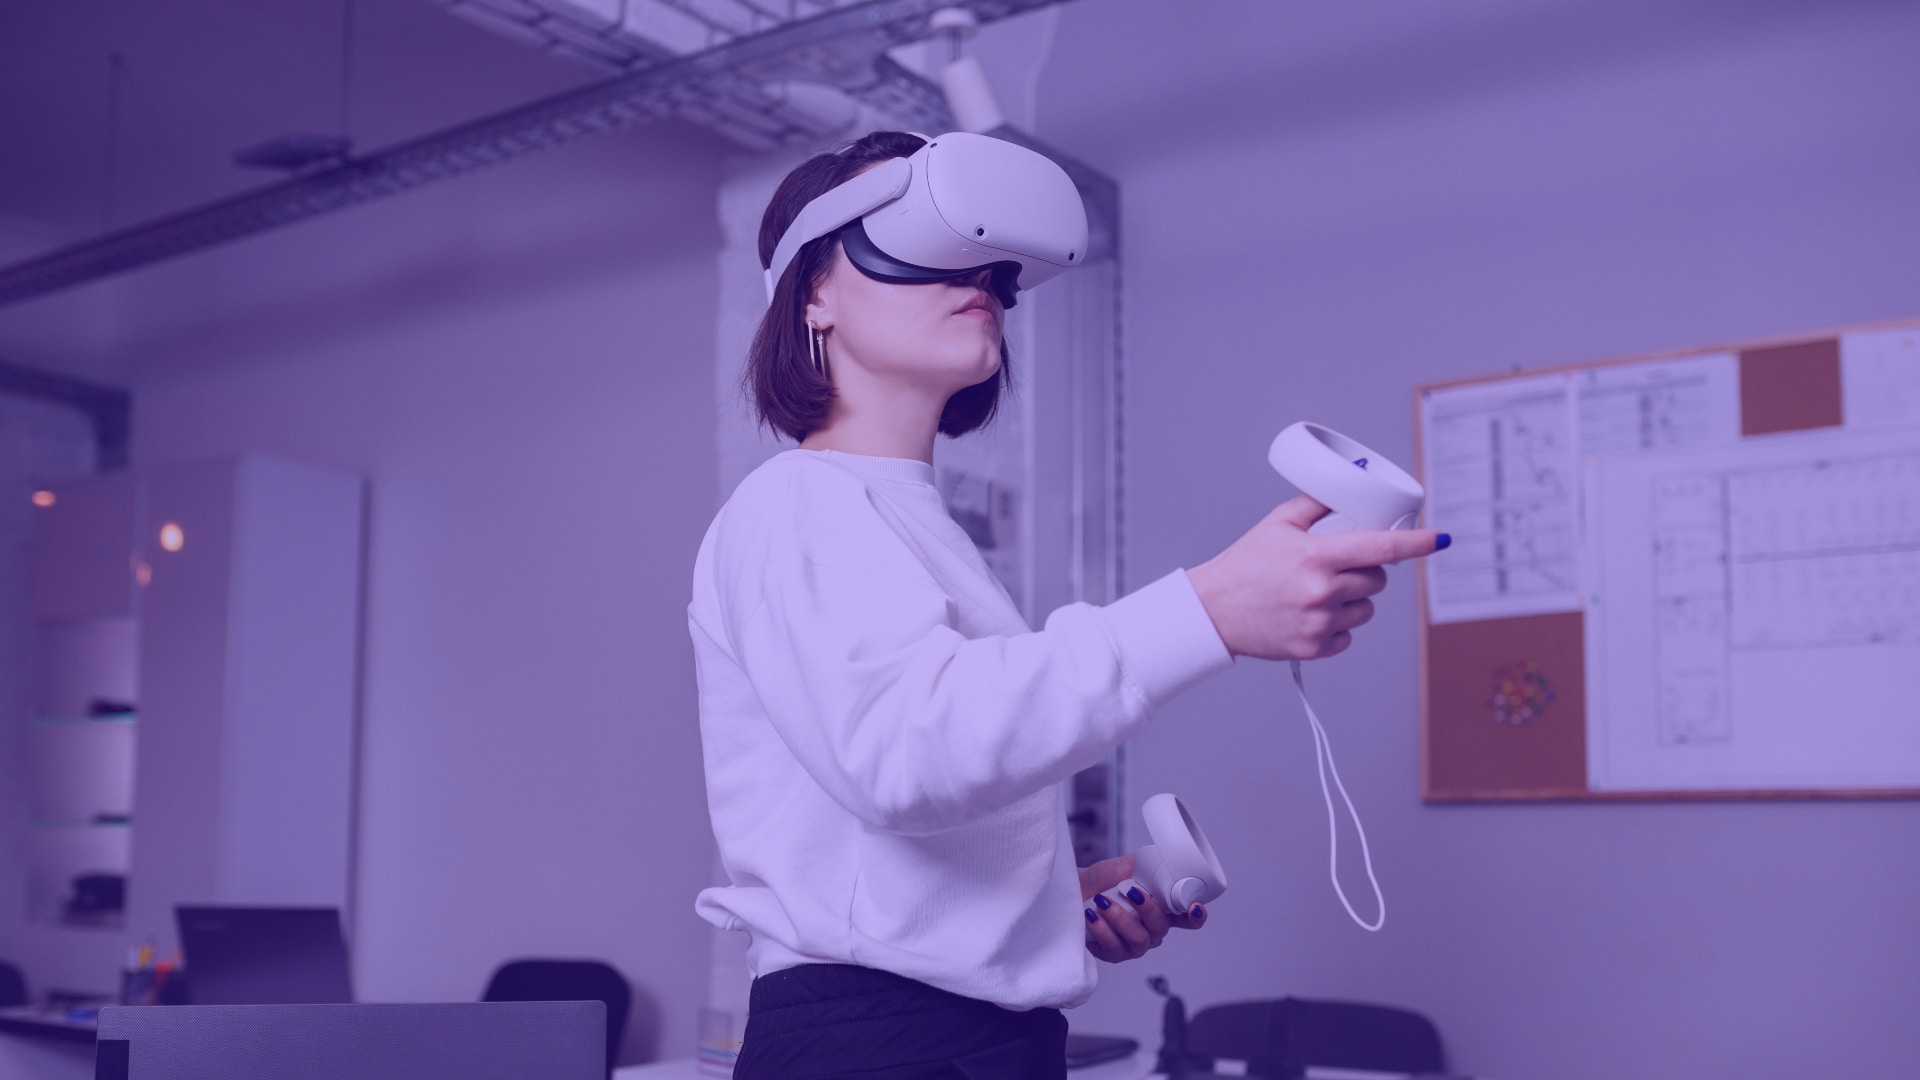 Woman in meta quest VR headset - a women stands in an office in a VR headset. She holds controllers in her hands.